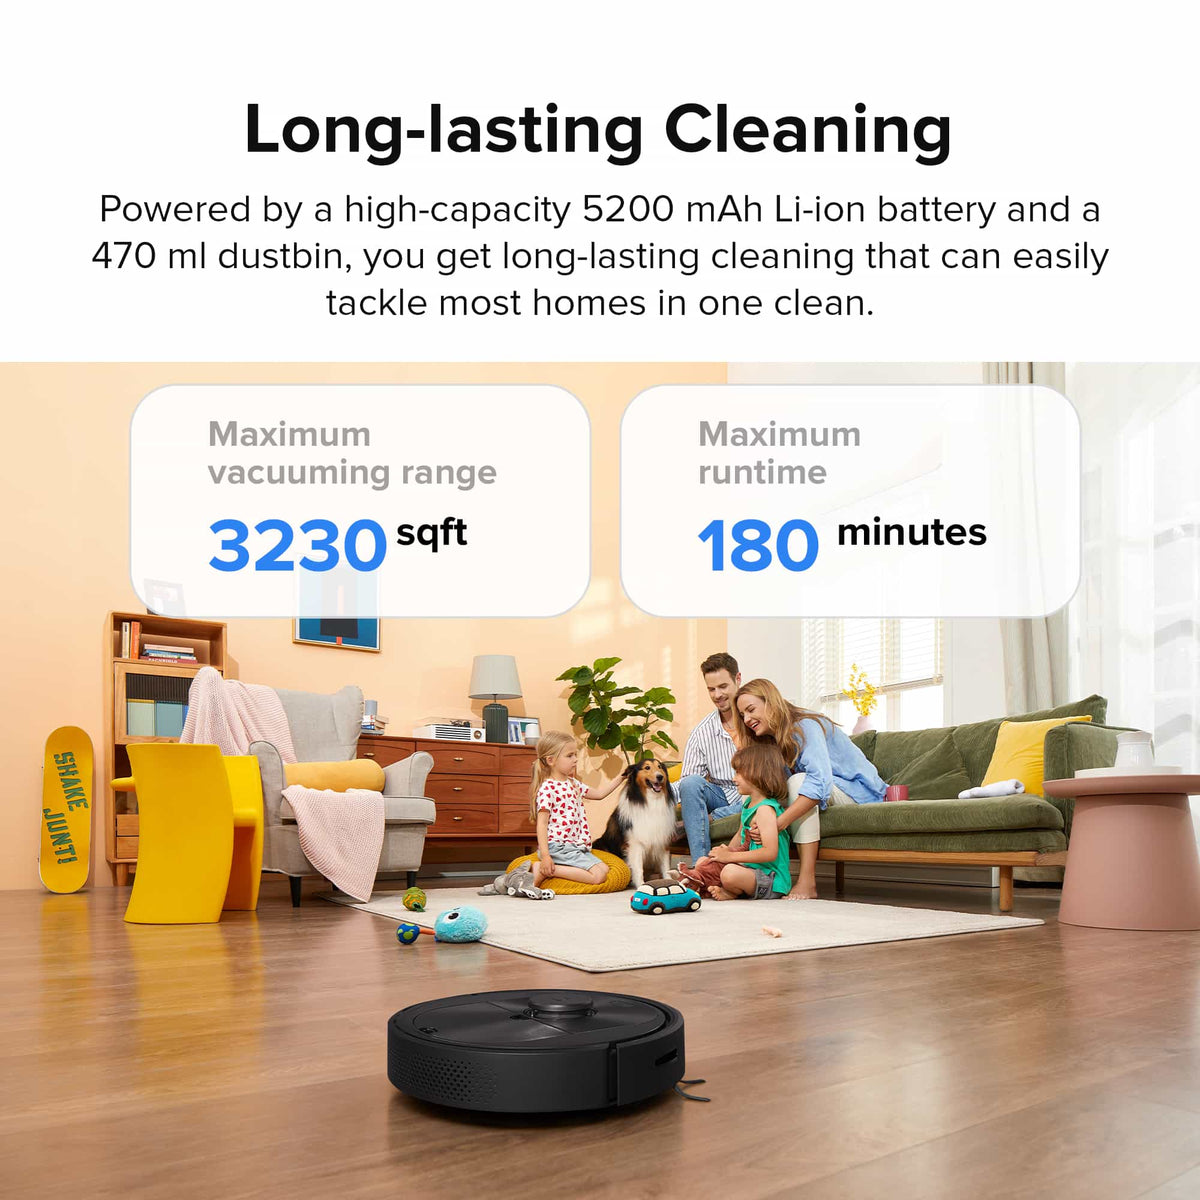 roborock Q5 Robot Vacuum Cleaner, Strong 2700Pa Suction, Upgraded from S4  Max, LiDAR Navigation, Multi-Level Mapping, 180 mins Runtime, No-go Zones